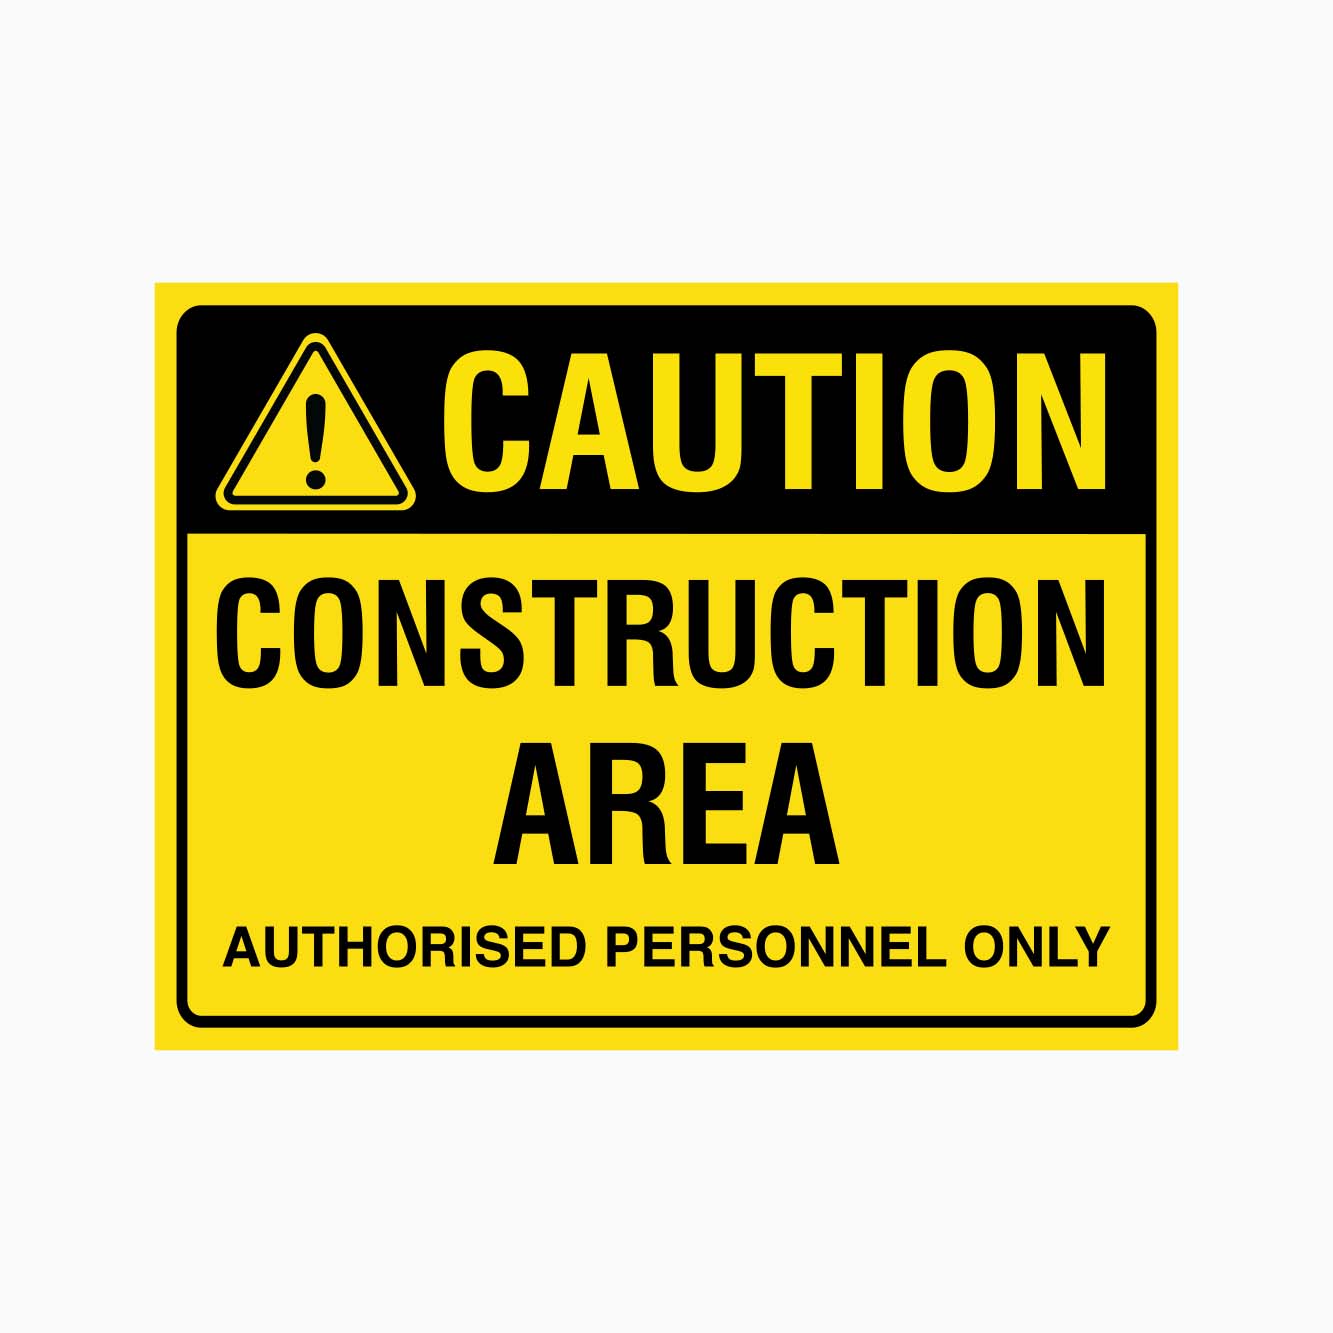 CAUTION CONSTRUCTION AREA SIGN - AUTHORISED PERSONNEL ONLY SIGN